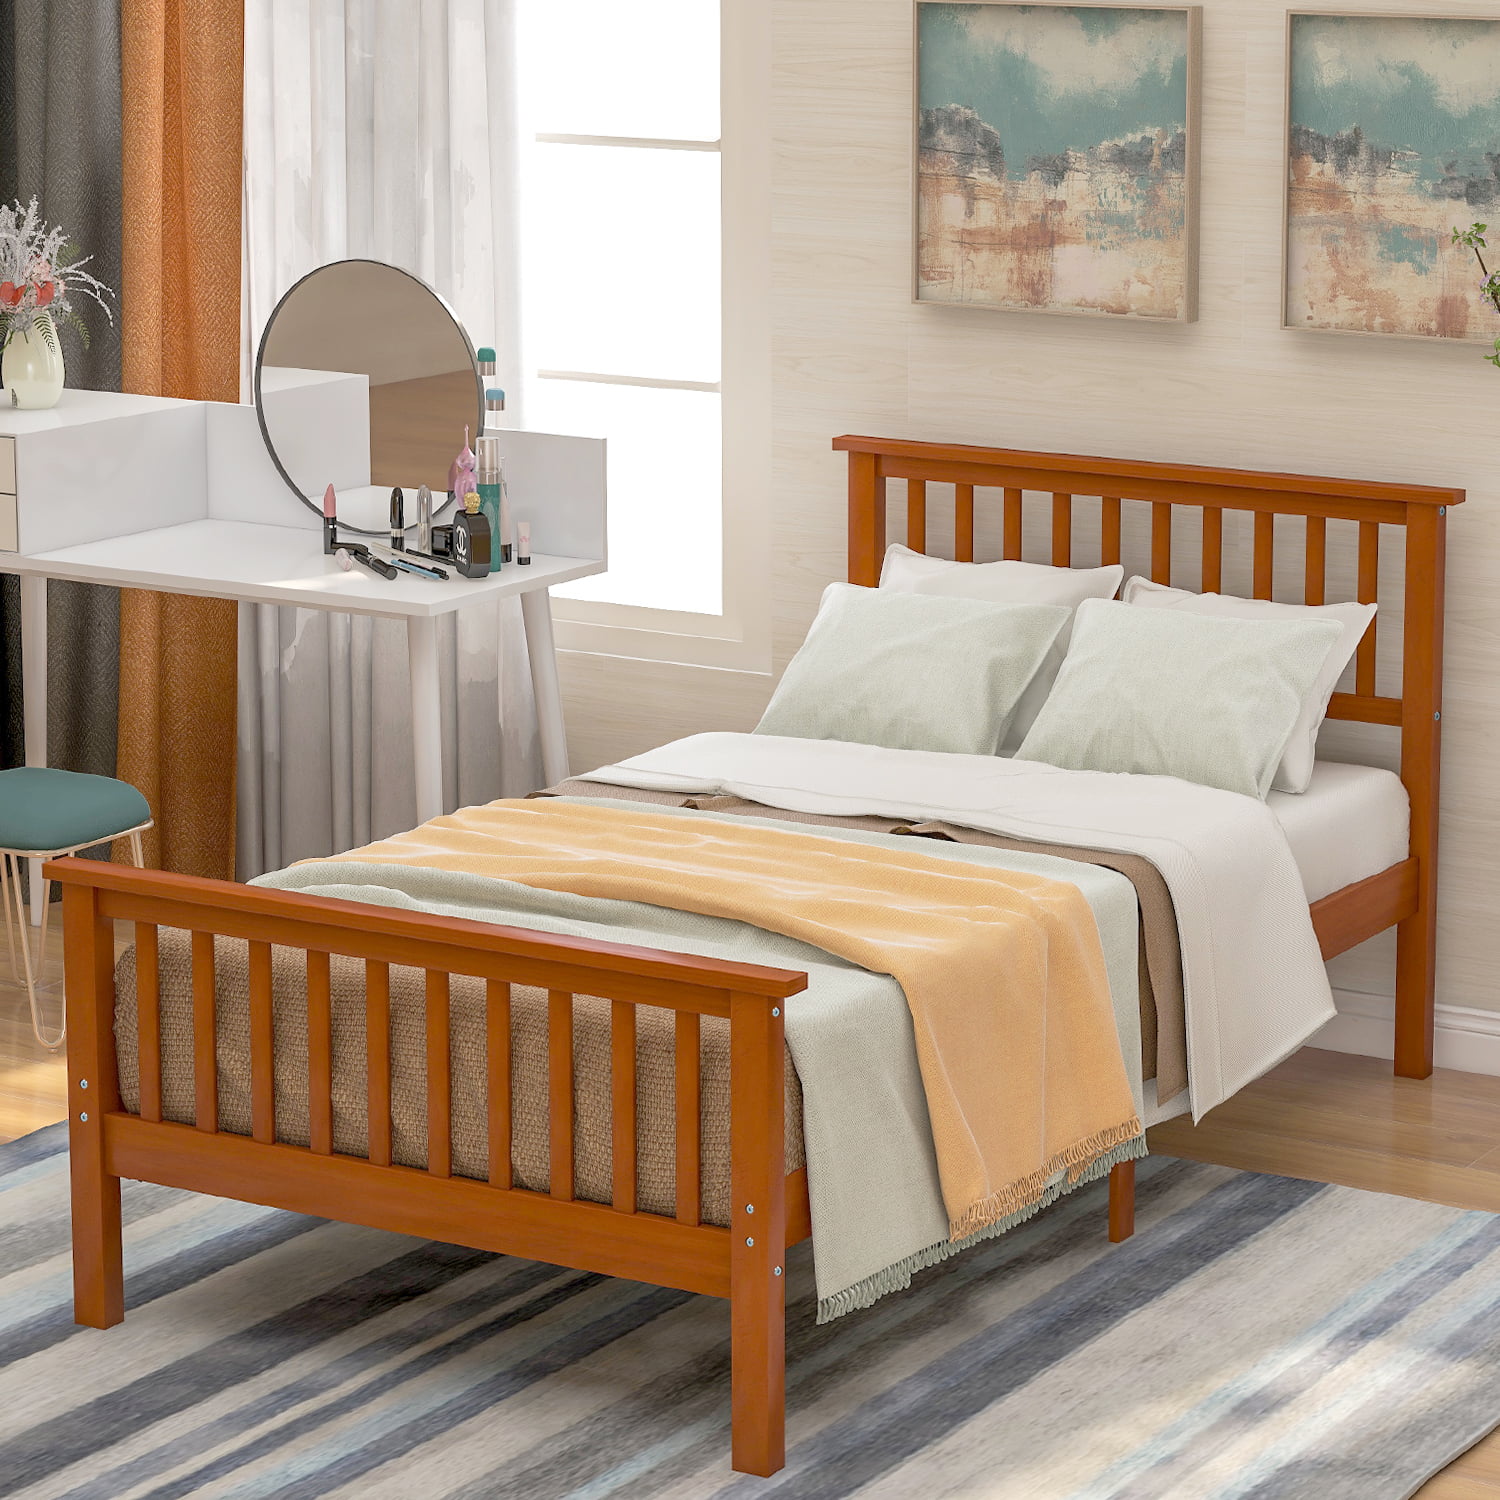 Twin Platform Bed Frame, URHOMEPRO Wooden Twin Bed Frame with Headboard